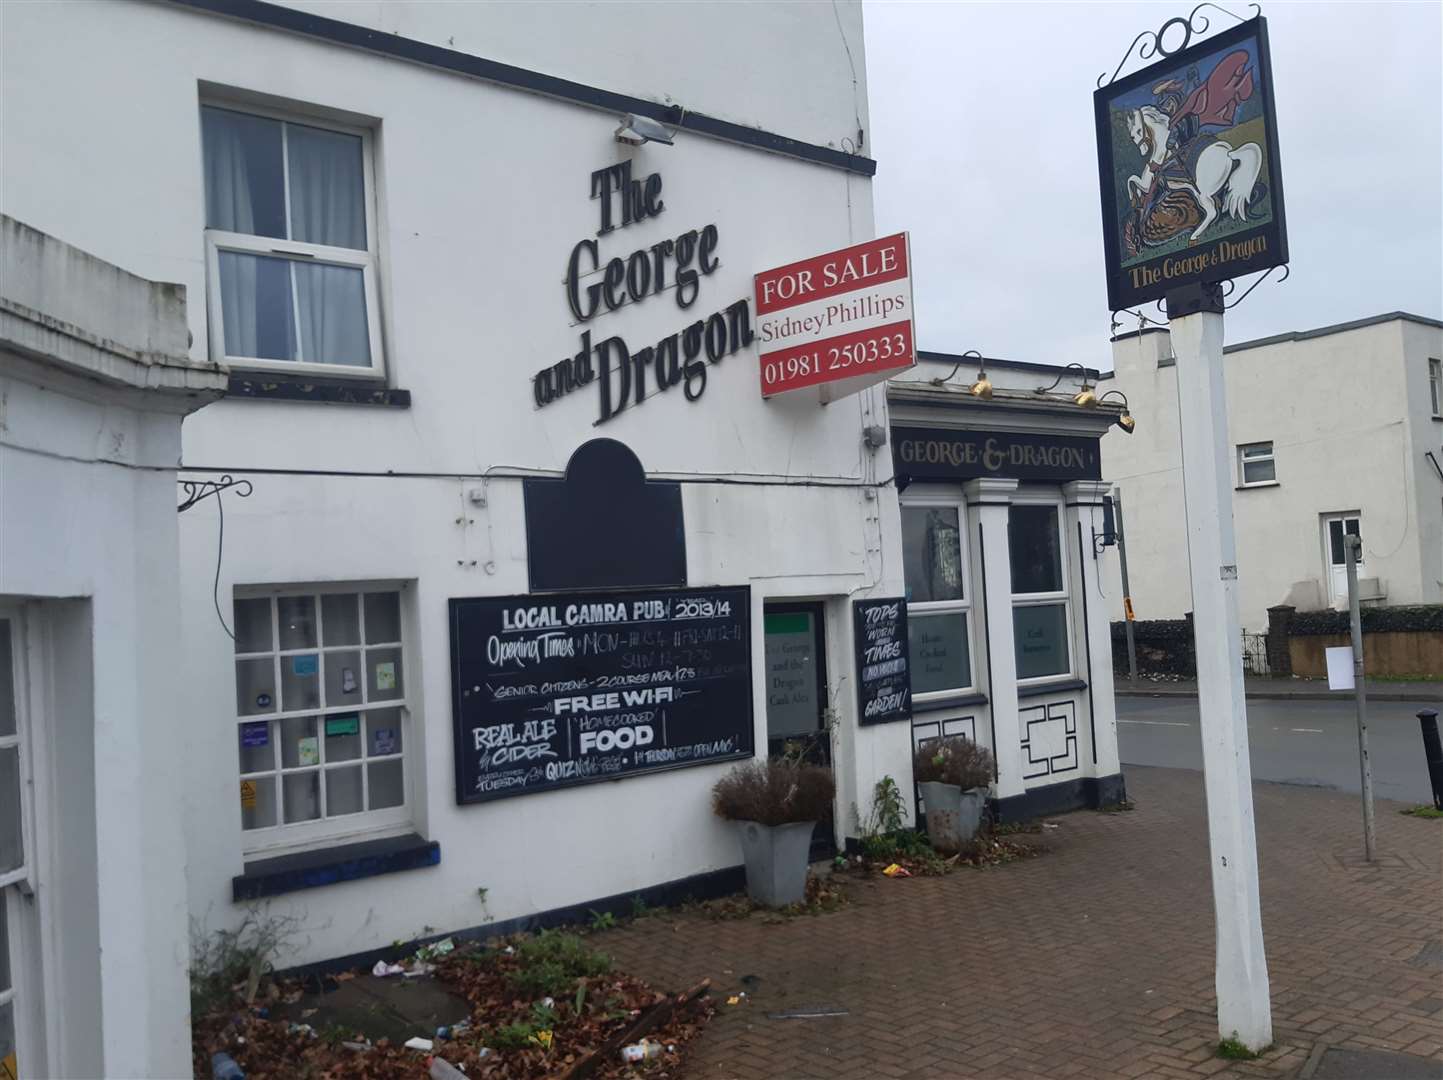 The George and Dragon pub at the end of Swanscombe High Street faces an uncertain future.